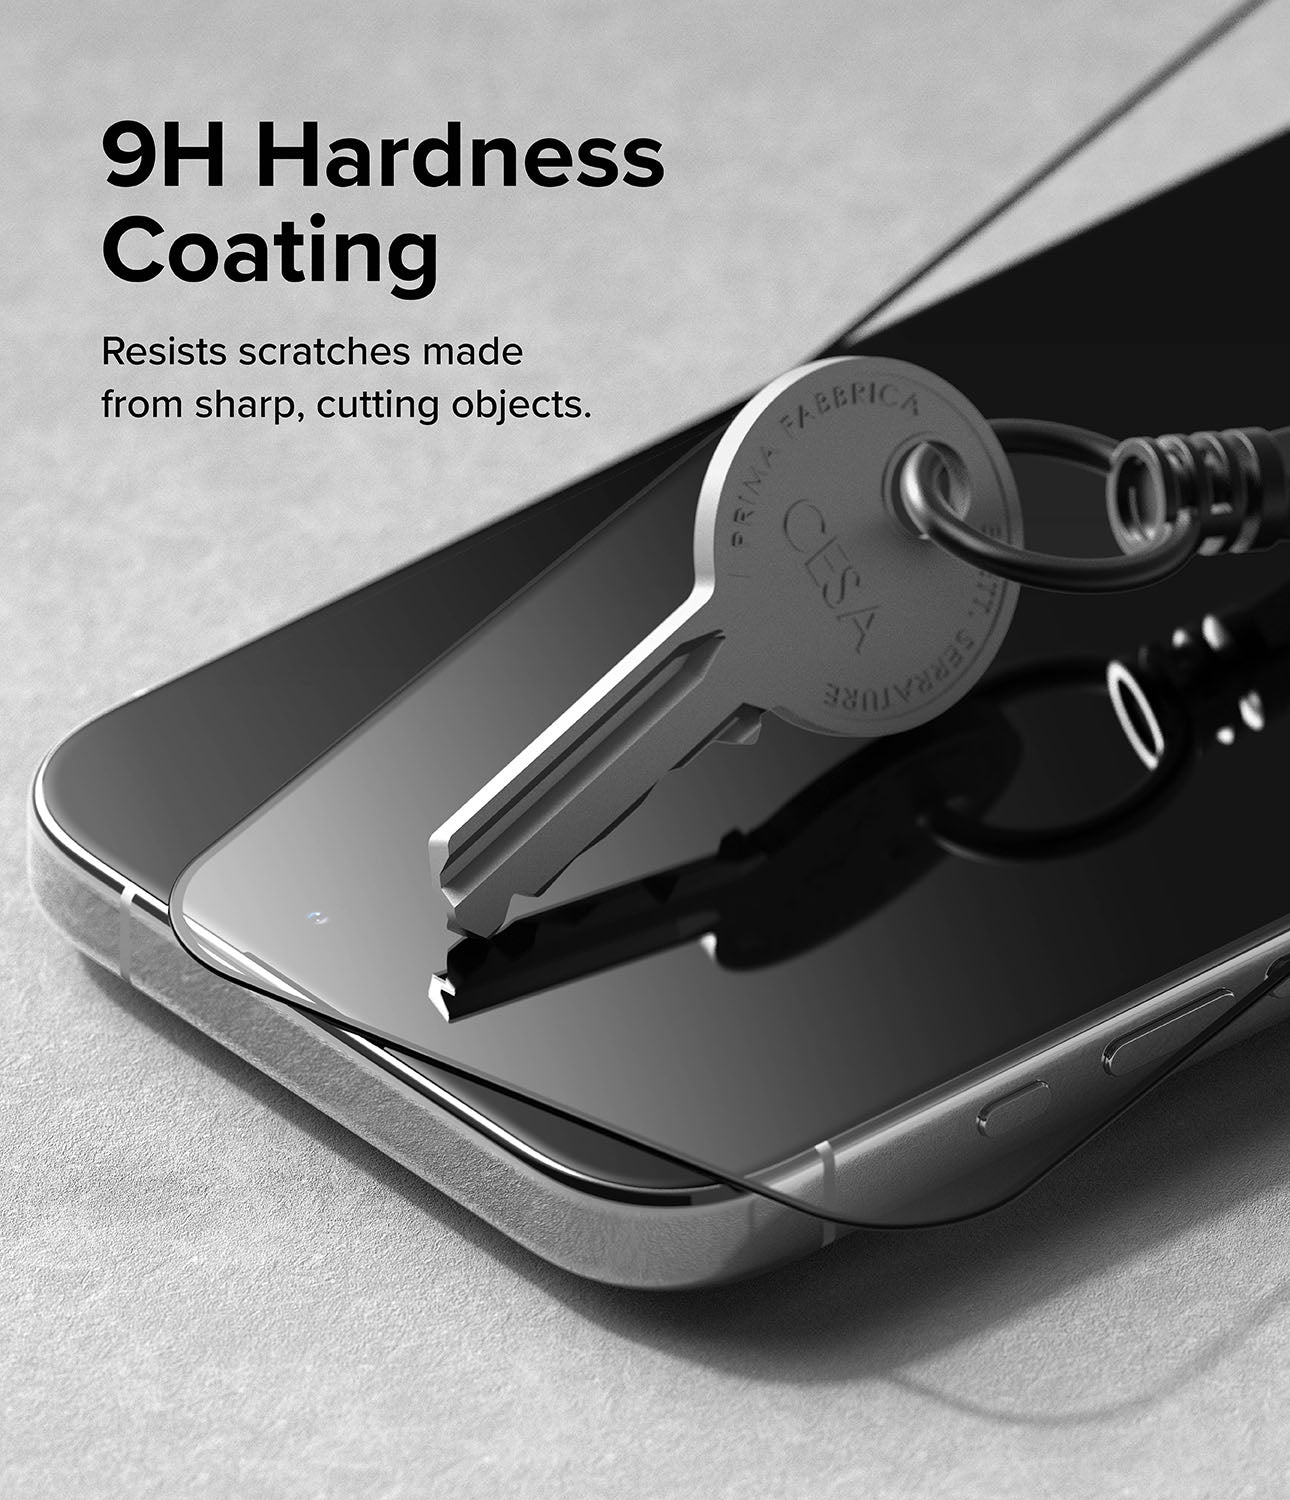 iPhone 15 Pro Max Screen Protector | Full Cover Glass - 9H Hardness Coating. Resists scratches made from sharp, cutting objects.